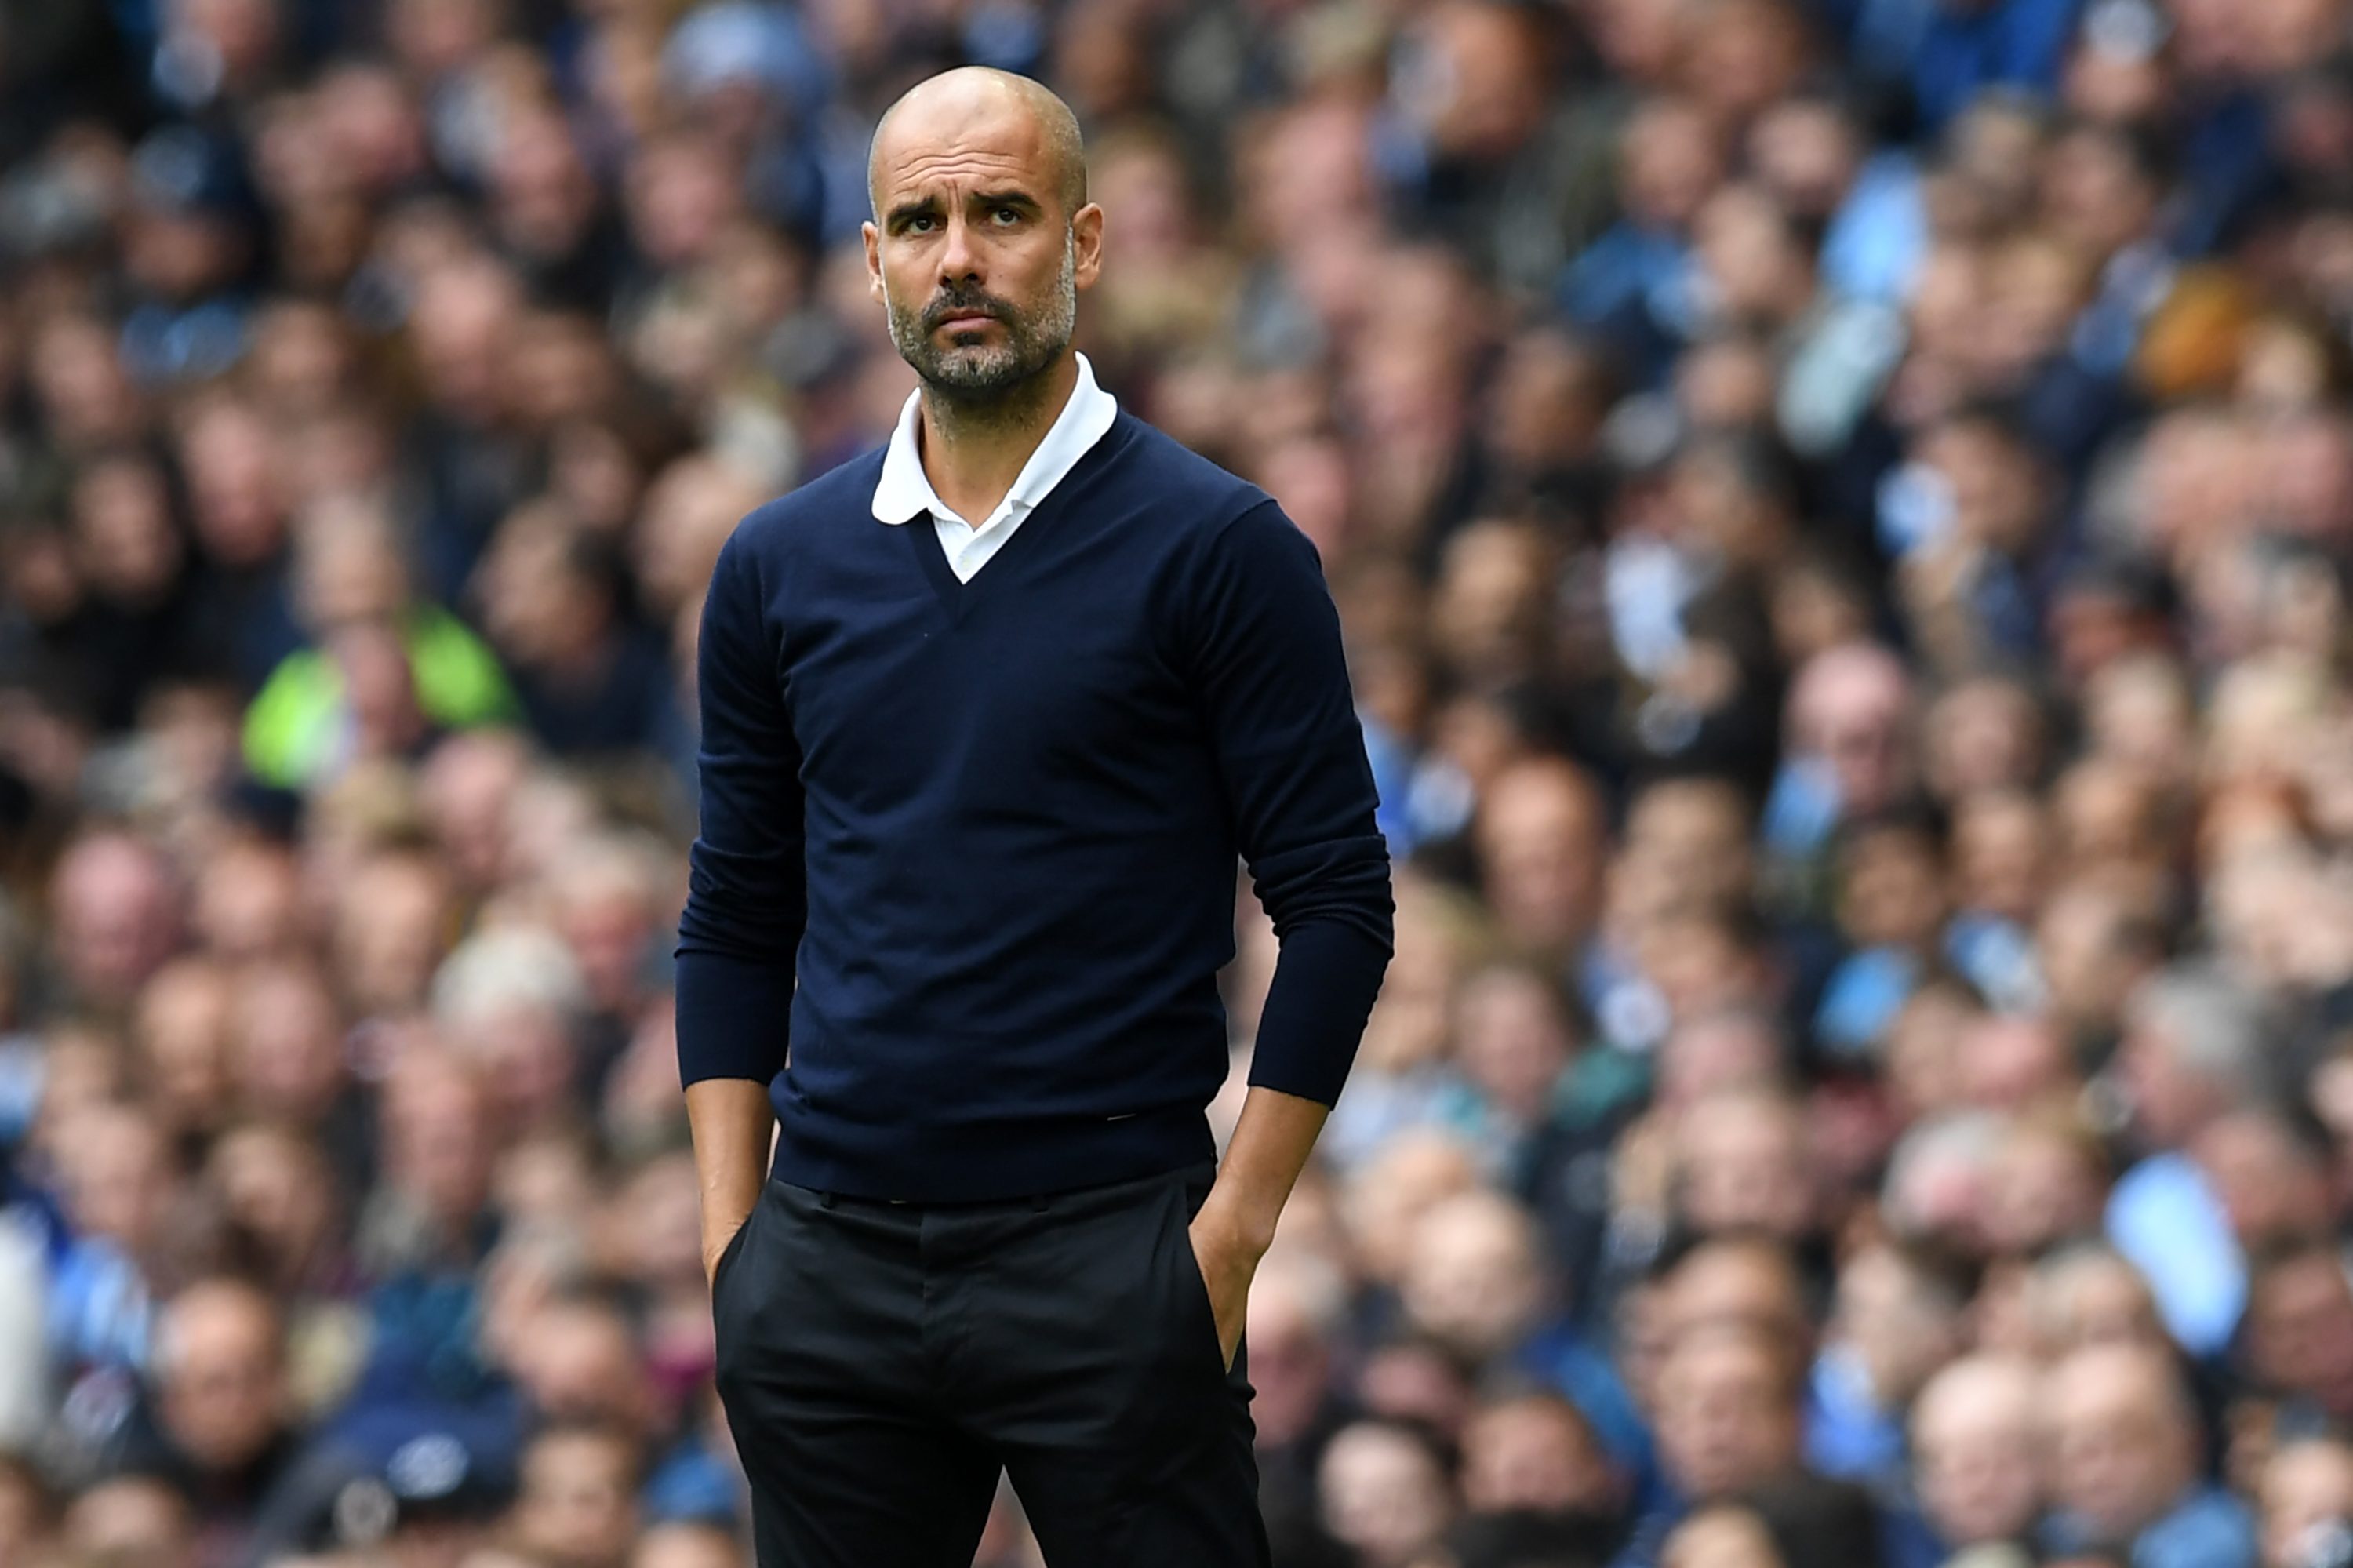 Manchester City's Spanish manager Pep Guardiola watches from the touchline during the English Premier League football match between Manchester City and Liverpool at the Etihad Stadium in Manchester, north west England, on September 9, 2017. / AFP PHOTO / Paul ELLIS / RESTRICTED TO EDITORIAL USE. No use with unauthorized audio, video, data, fixture lists, club/league logos or 'live' services. Online in-match use limited to 75 images, no video emulation. No use in betting, games or single club/league/player publications. / (Photo credit should read PAUL ELLIS/AFP/Getty Images)